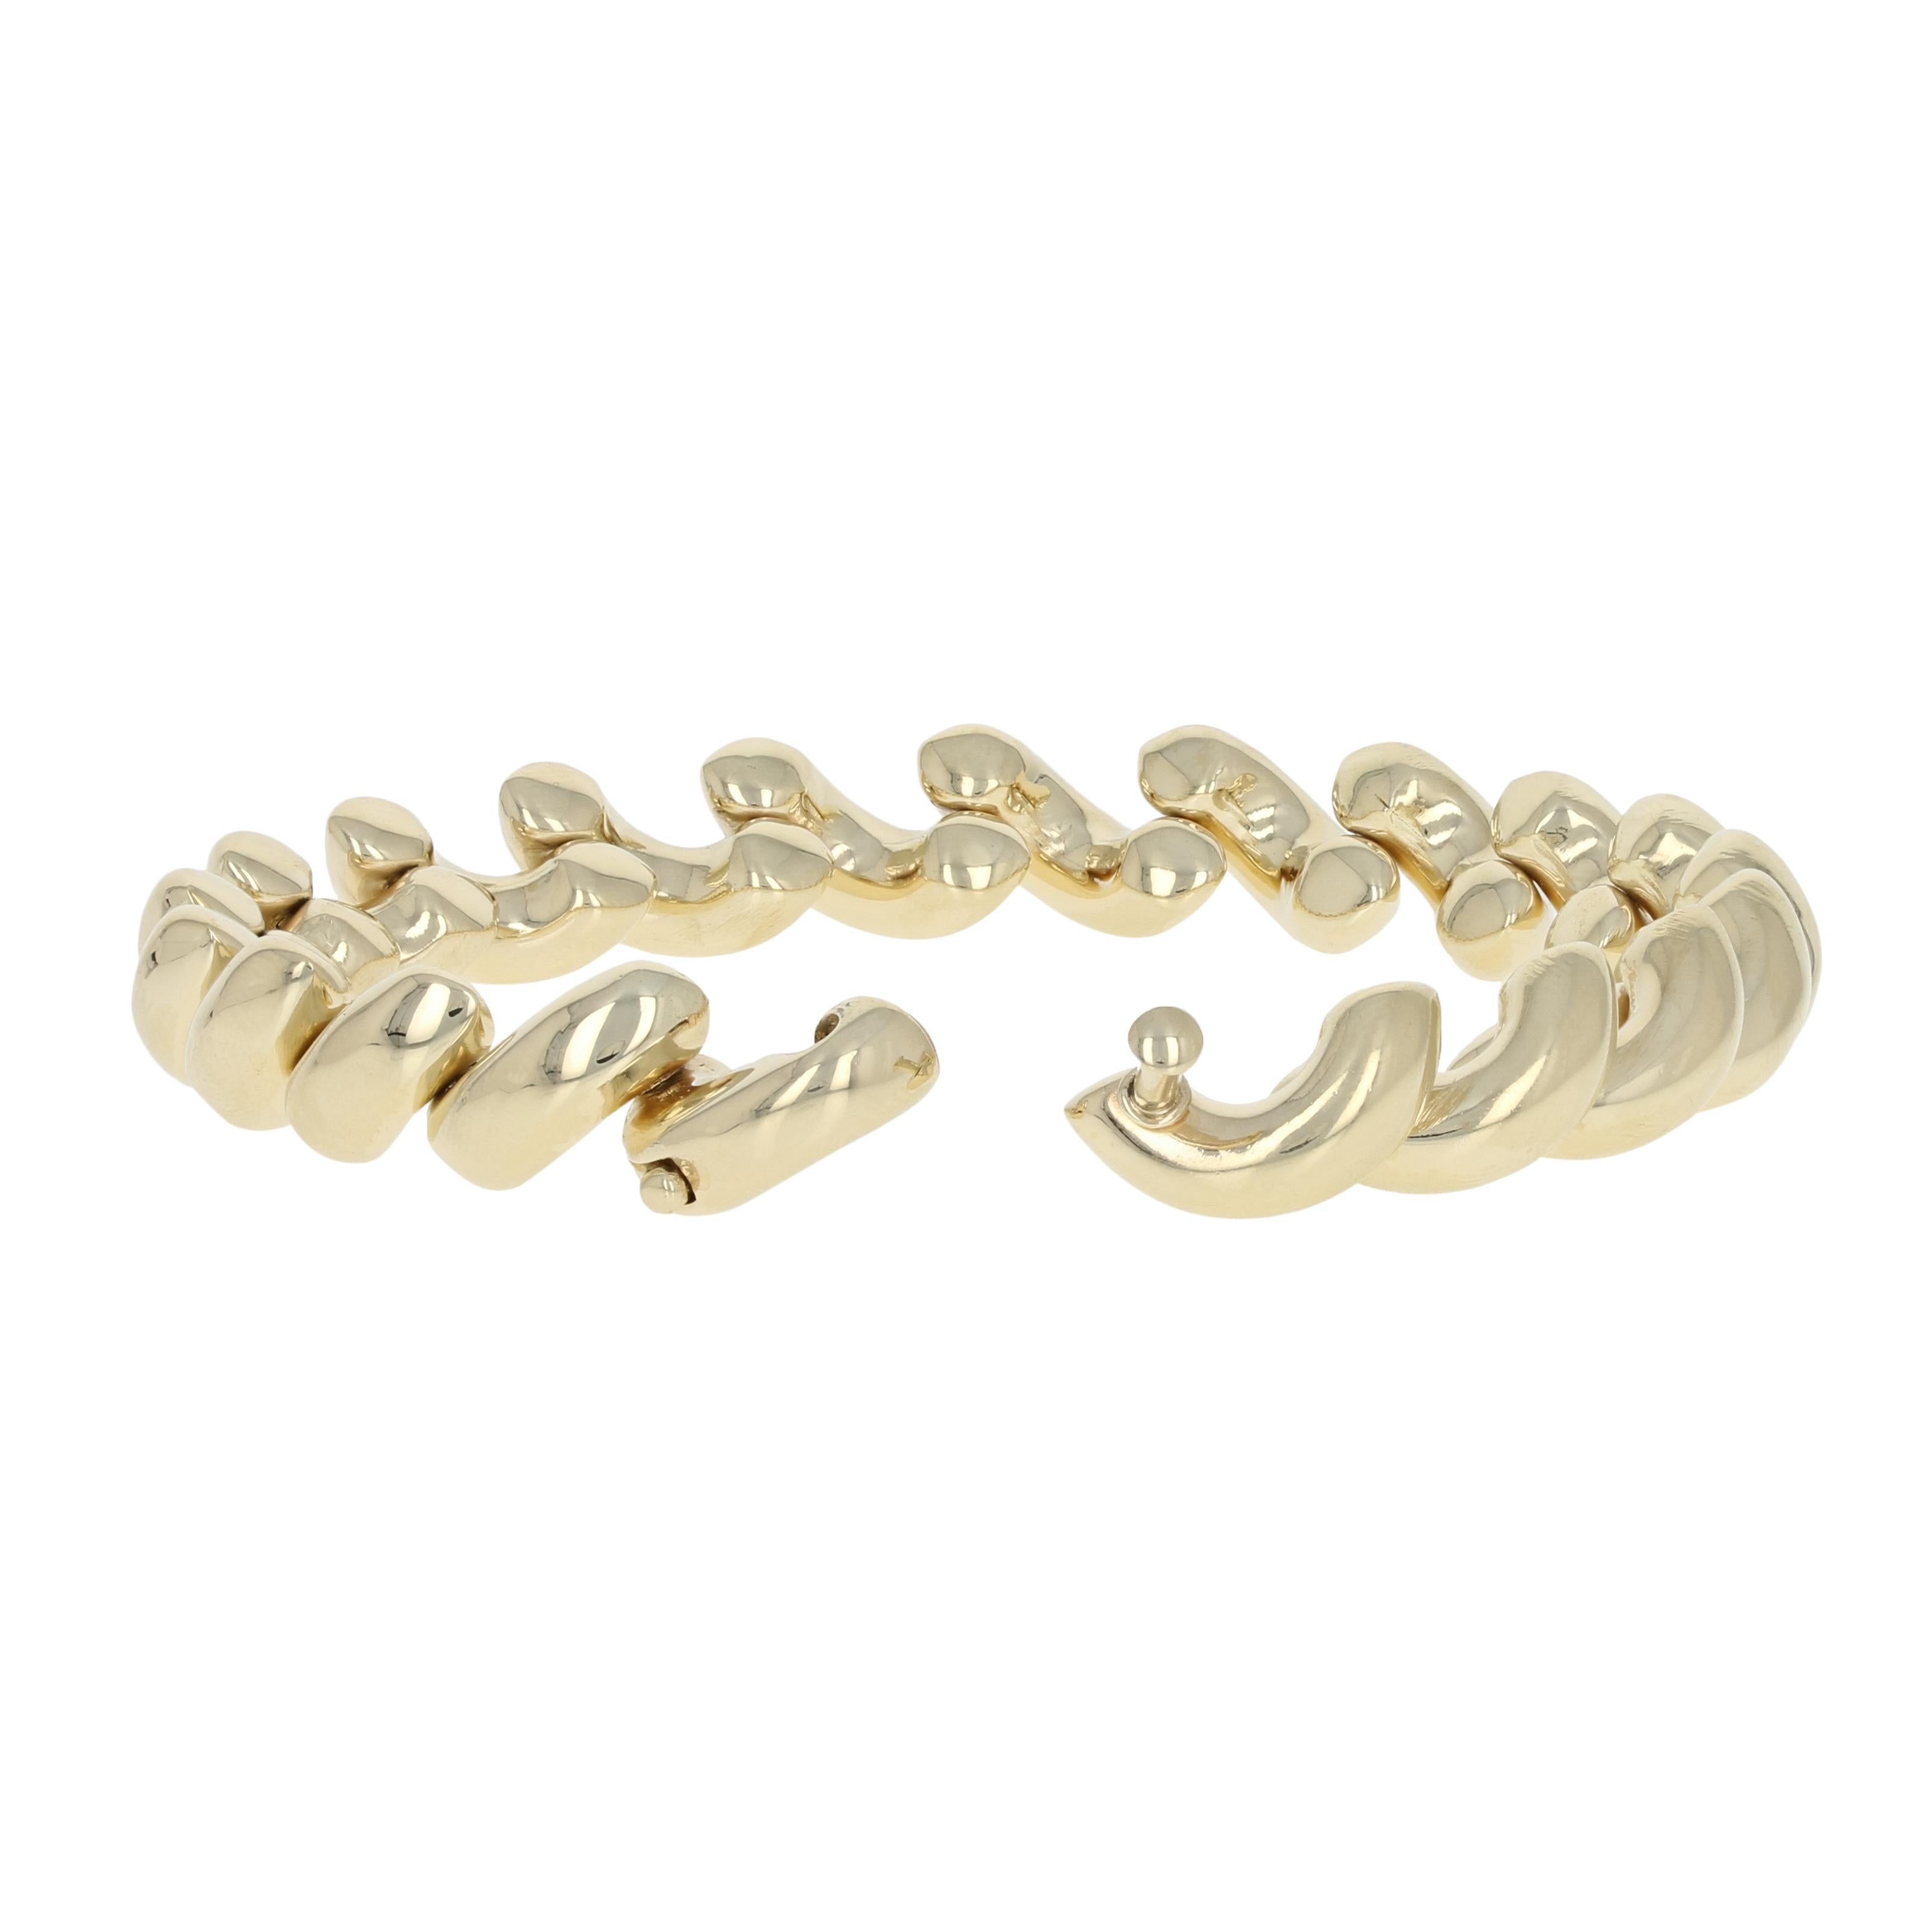 Invest in an Italian work of art! Featuring a classic San Marco chain design, this 14k yellow gold bracelet articulates beautifully and showcases a polished finish that ensures comfortable wear and a luminous presentation from day to night.  